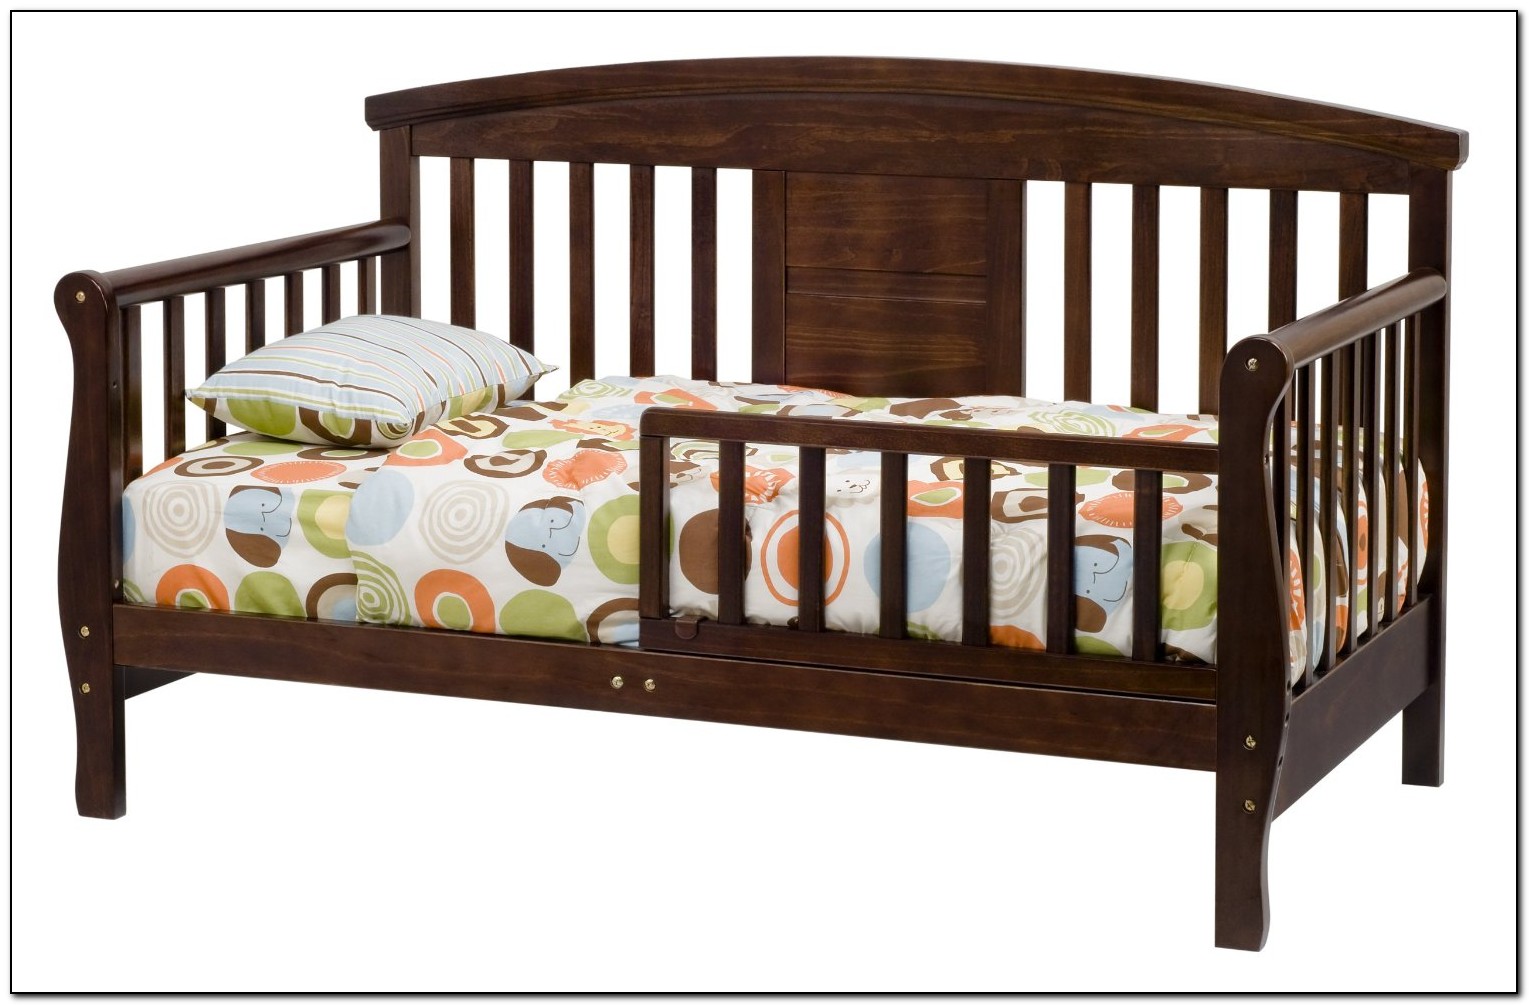 Toddler Beds For Boys Amazon